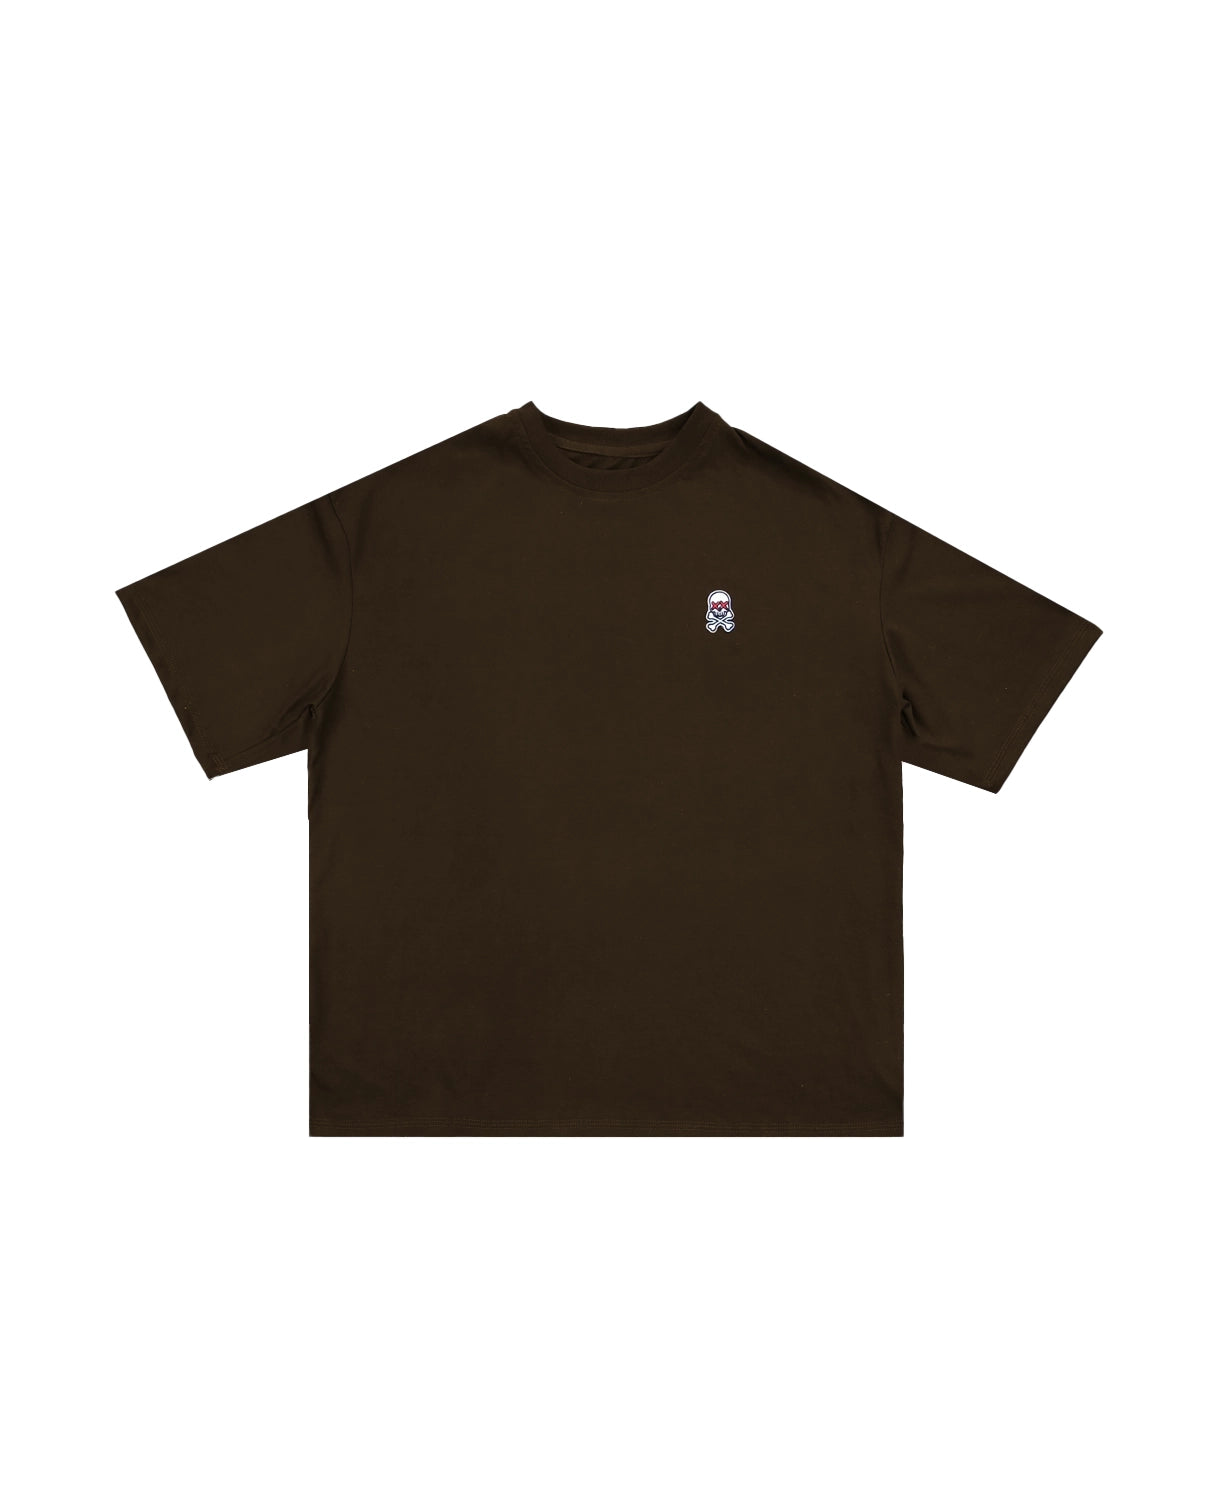 OVERSIZE PRO 2.0 BROWN